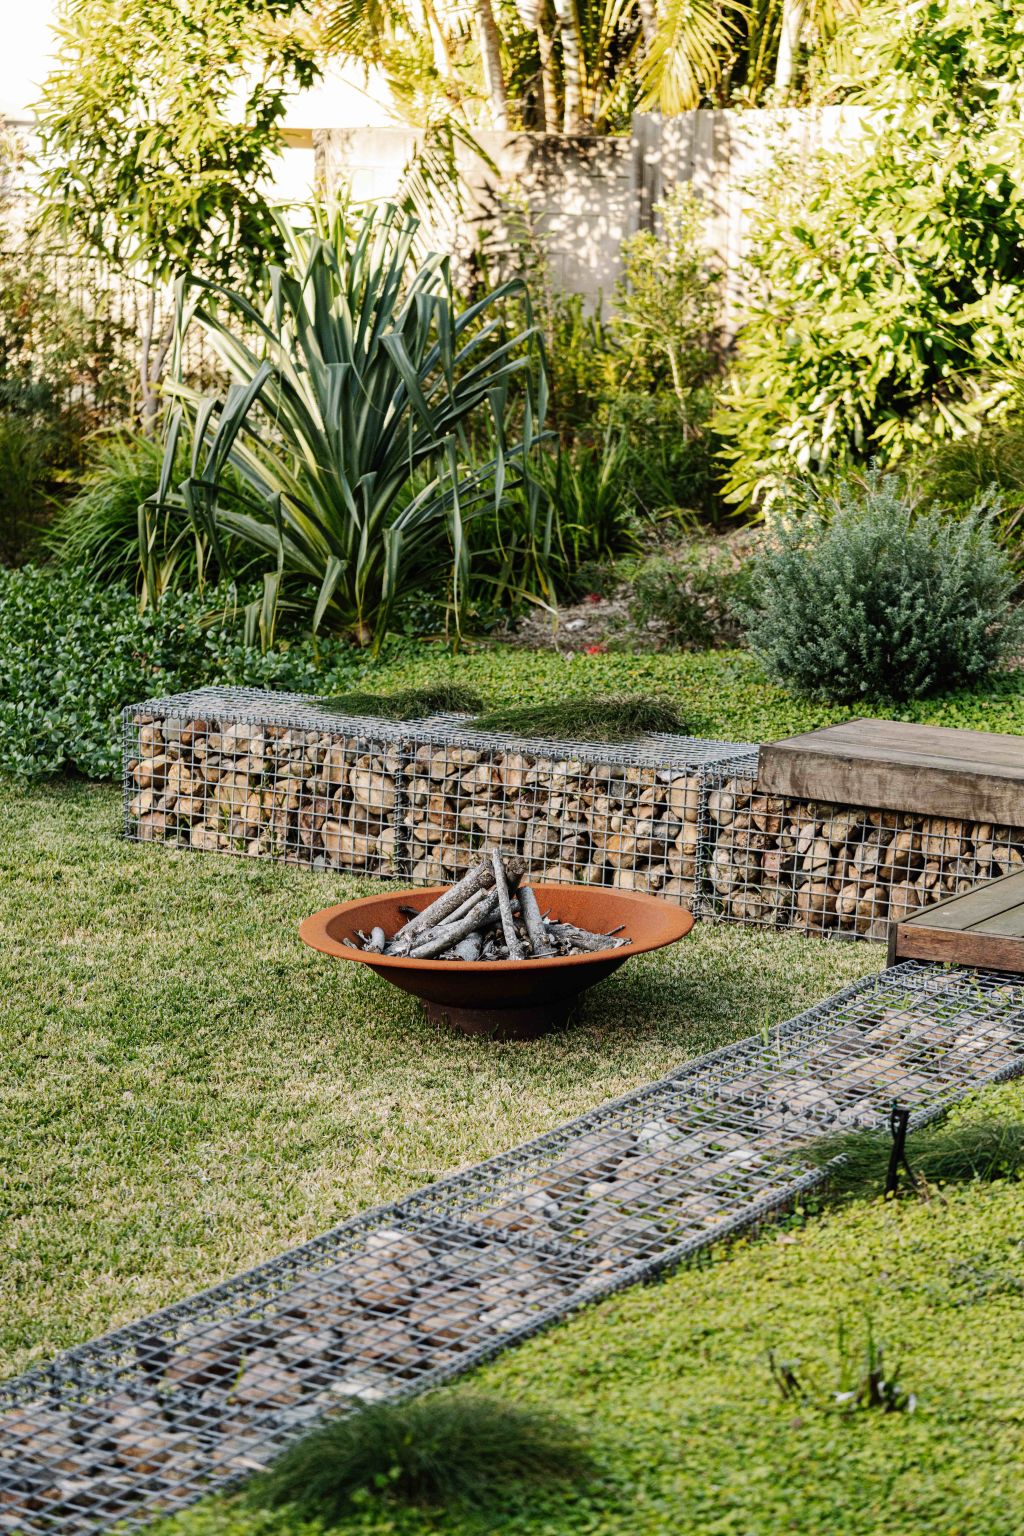 An outdoor fire pit is surrounded by gabion walls filled with Mary River stones. Photo: Marnie Hawson